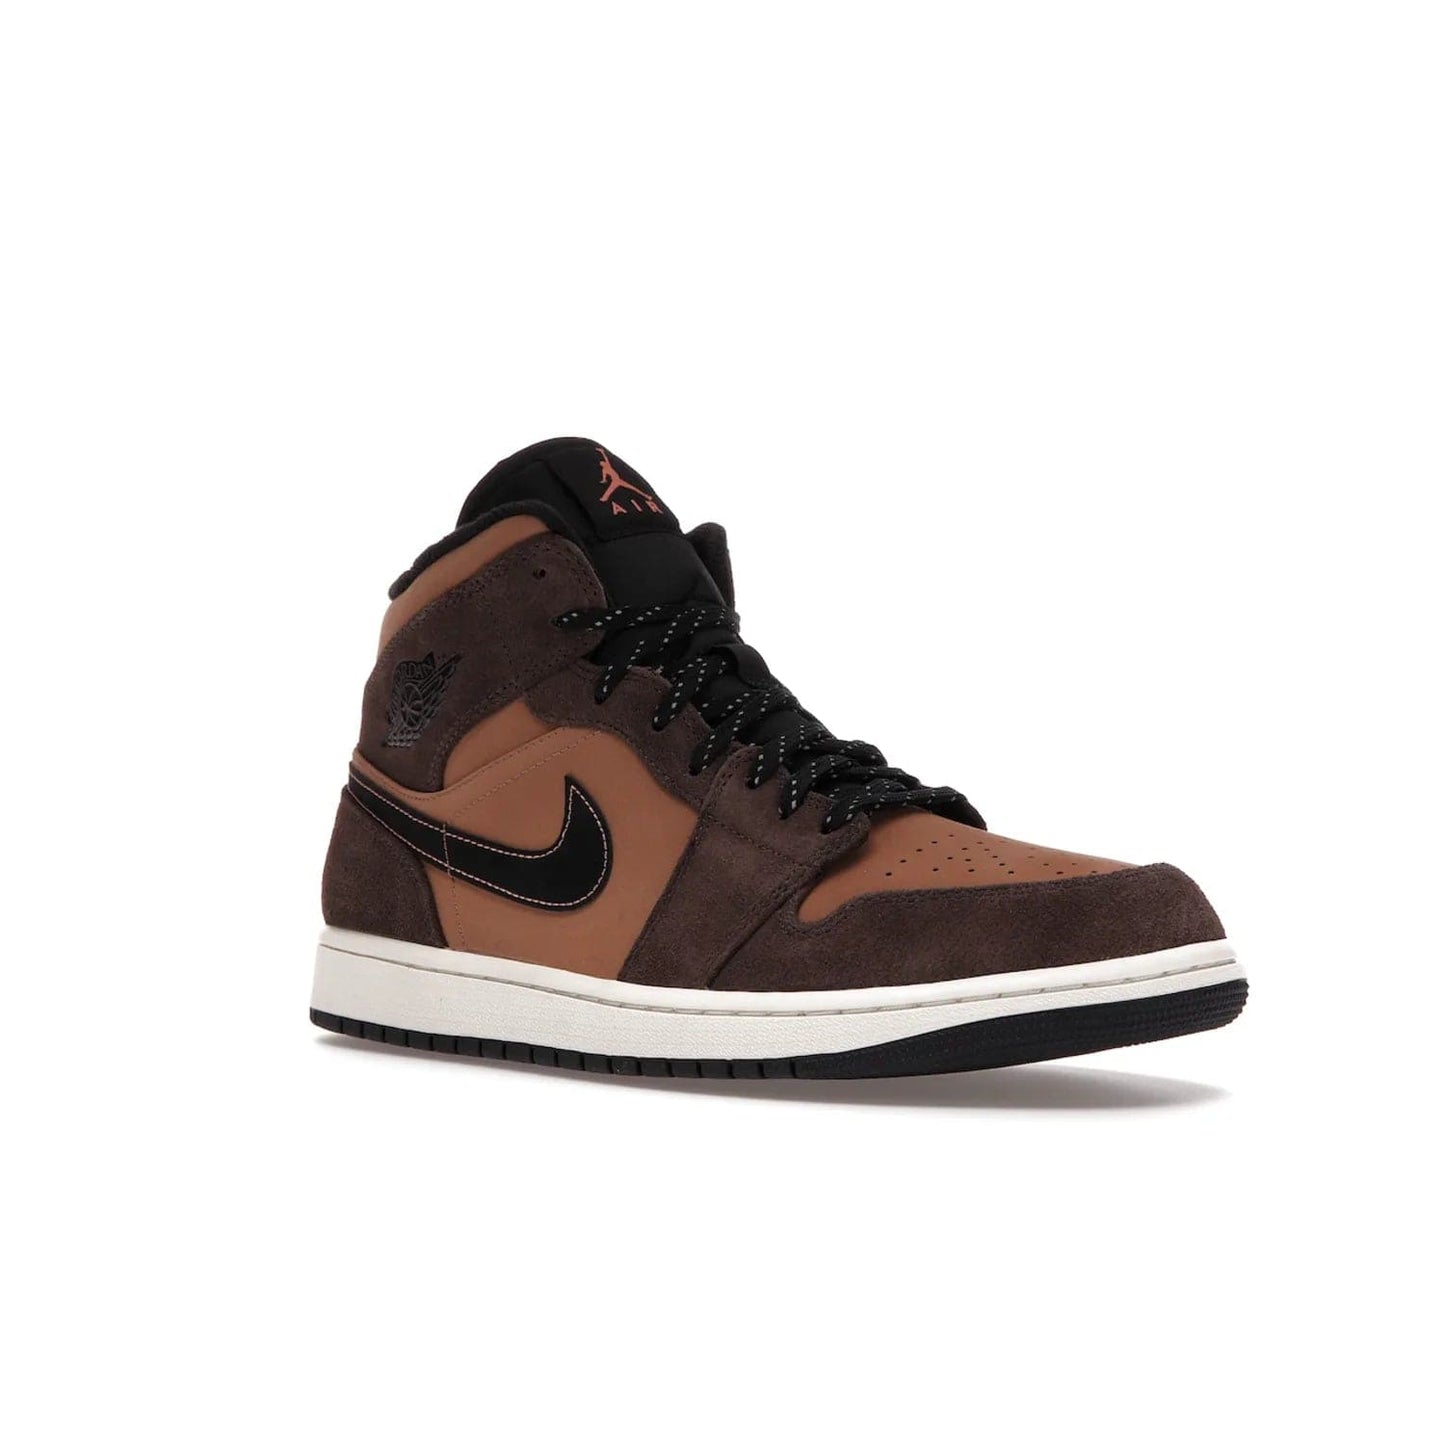 Jordan 1 Mid SE Dark Chocolate - Image 5 - Only at www.BallersClubKickz.com - This fashionable and functional Jordan 1 Mid SE Dark Chocolate features a light brown Durabuck upper, dark brown suede overlays, black Swoosh logos and reflective patch at heel. A must-have for any sneakerhead!